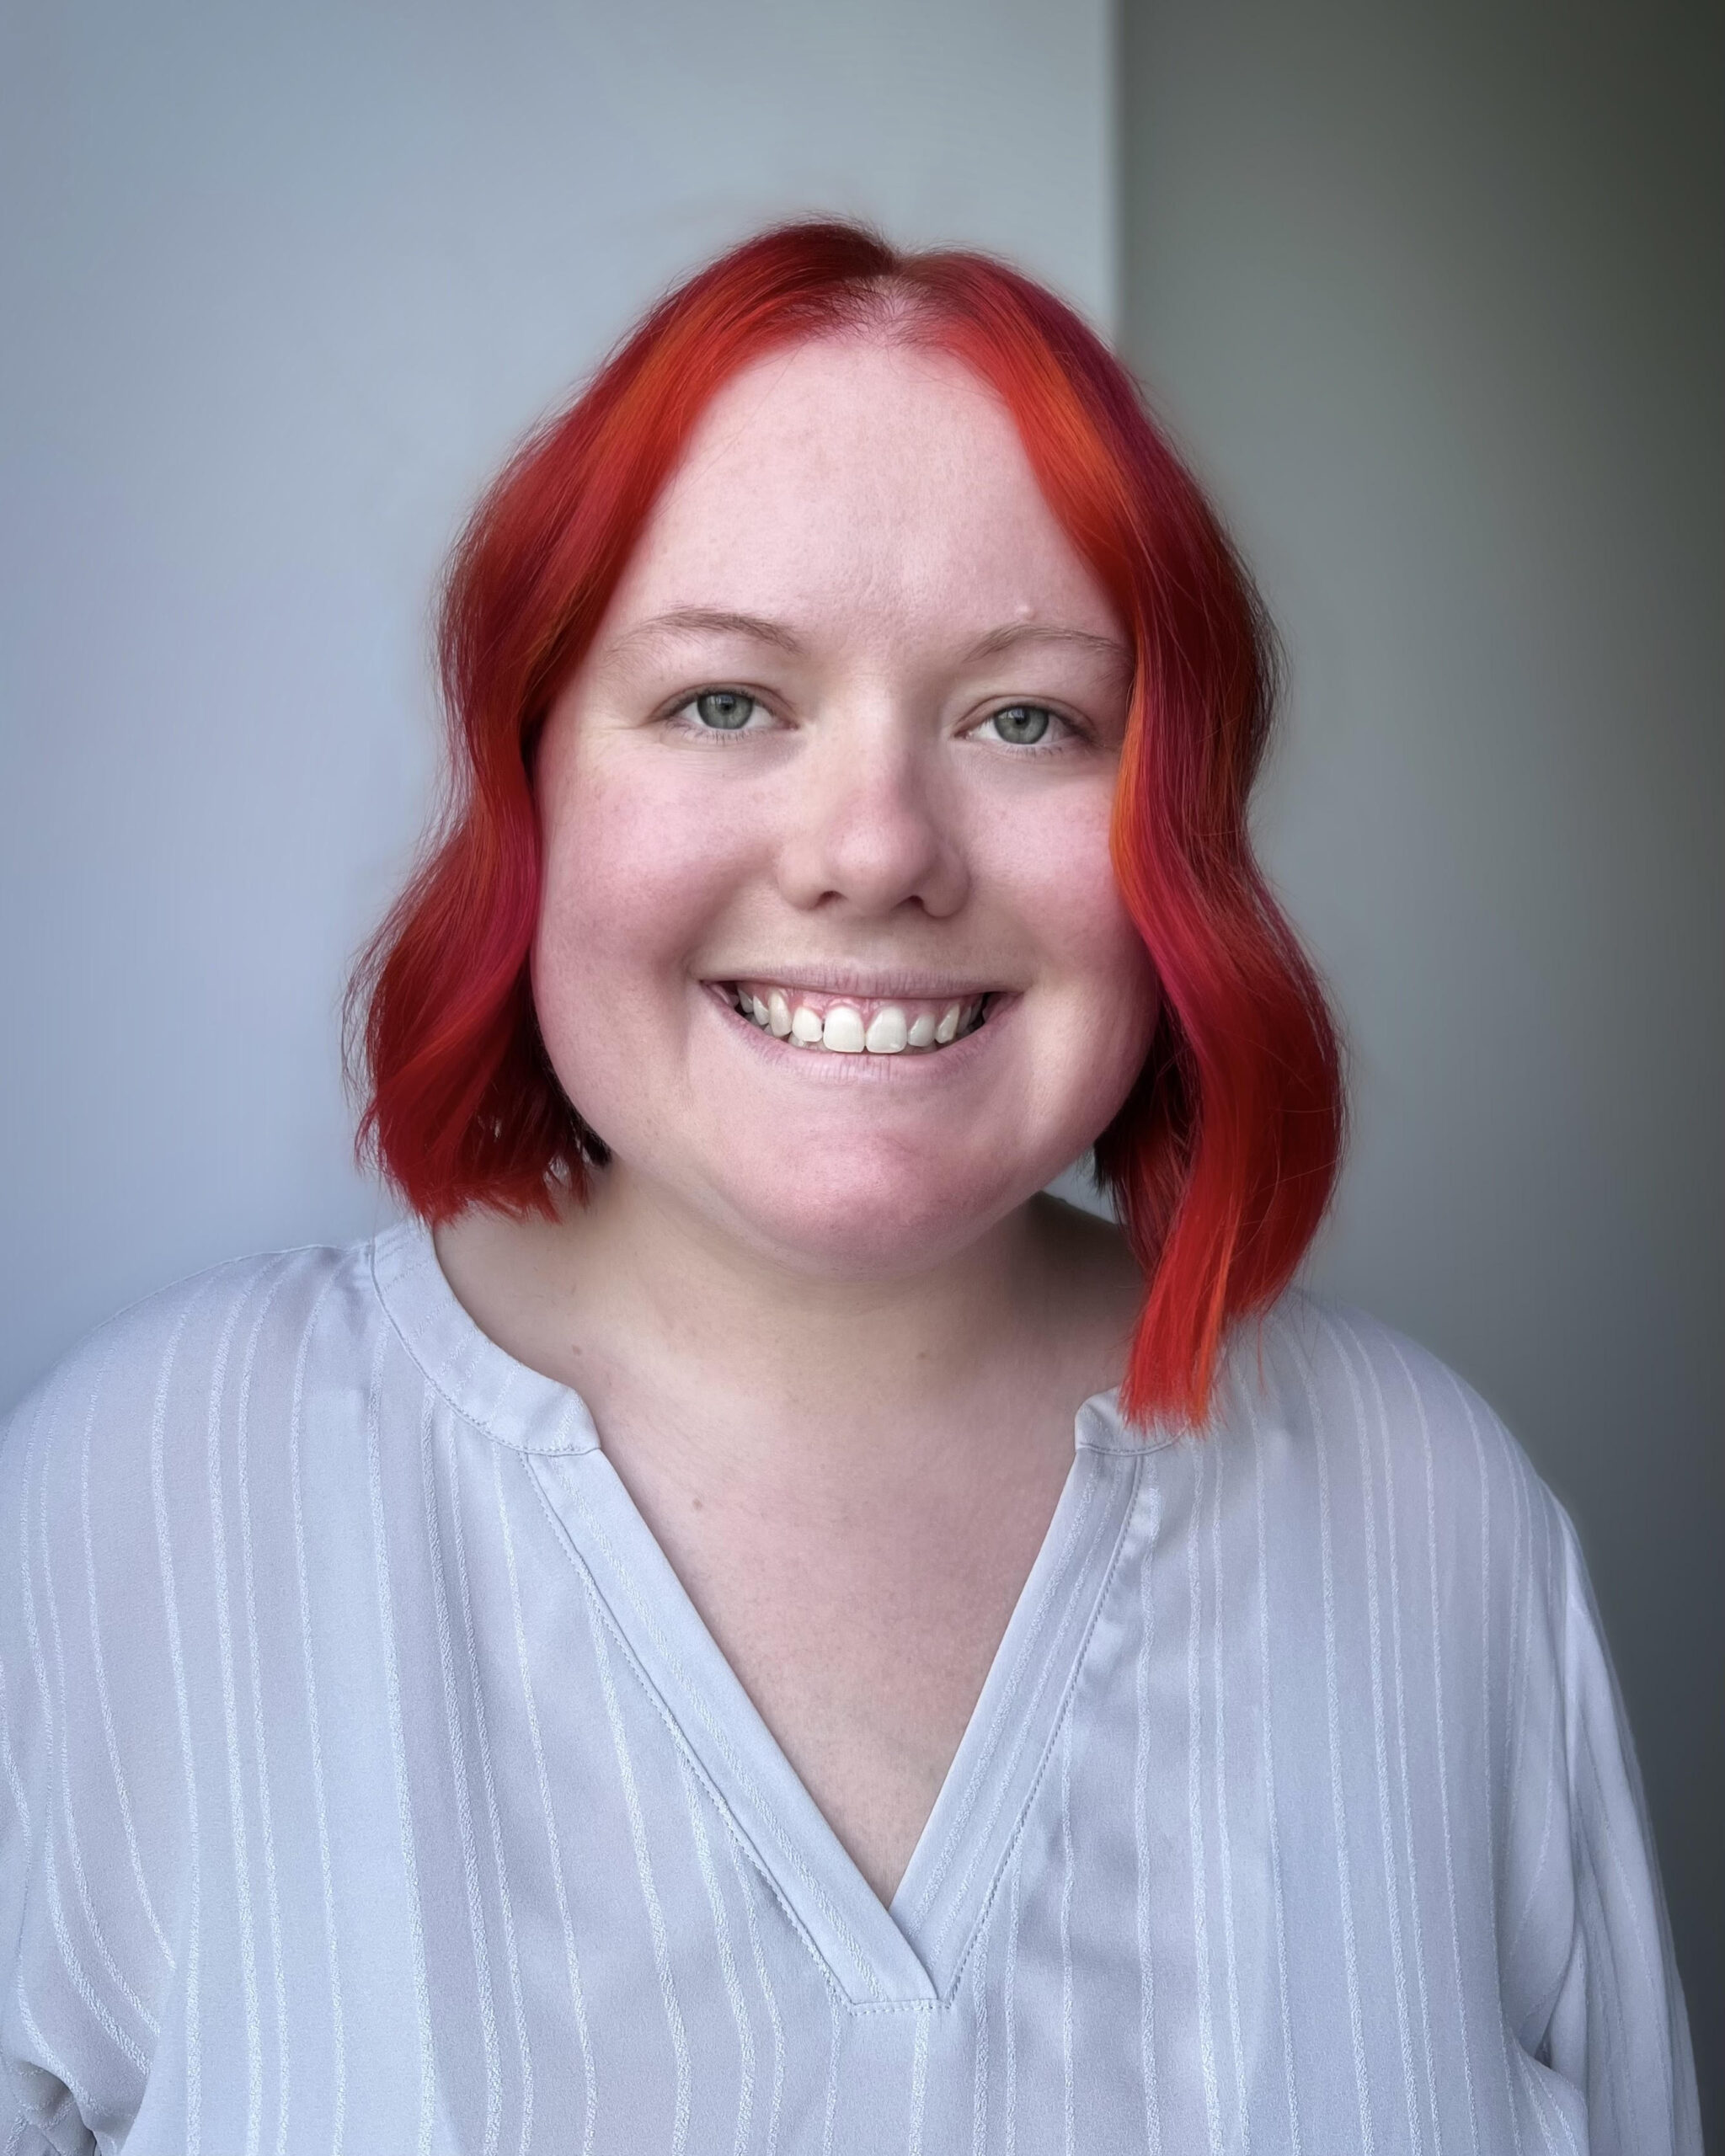 Jenny is a white woman in her late twenties with bright red hair that is cut right above her shoulders. It is curled slightly. She has bright eyes and a bright smile. She is pictured in front of a light white wall and is wearing a light white shirt.